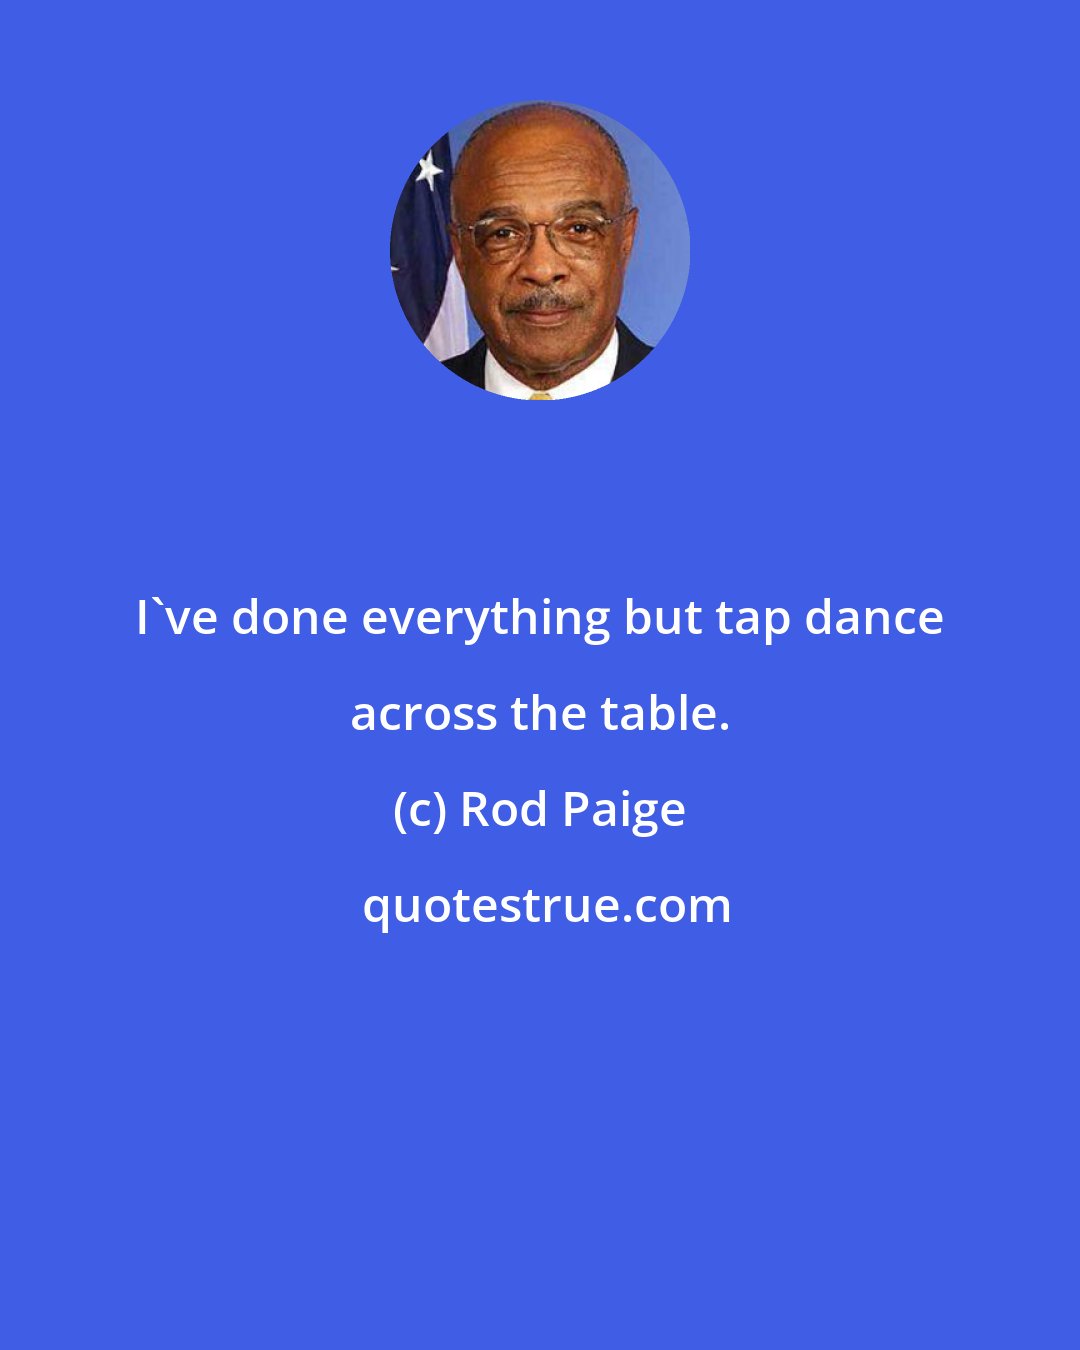 Rod Paige: I've done everything but tap dance across the table.